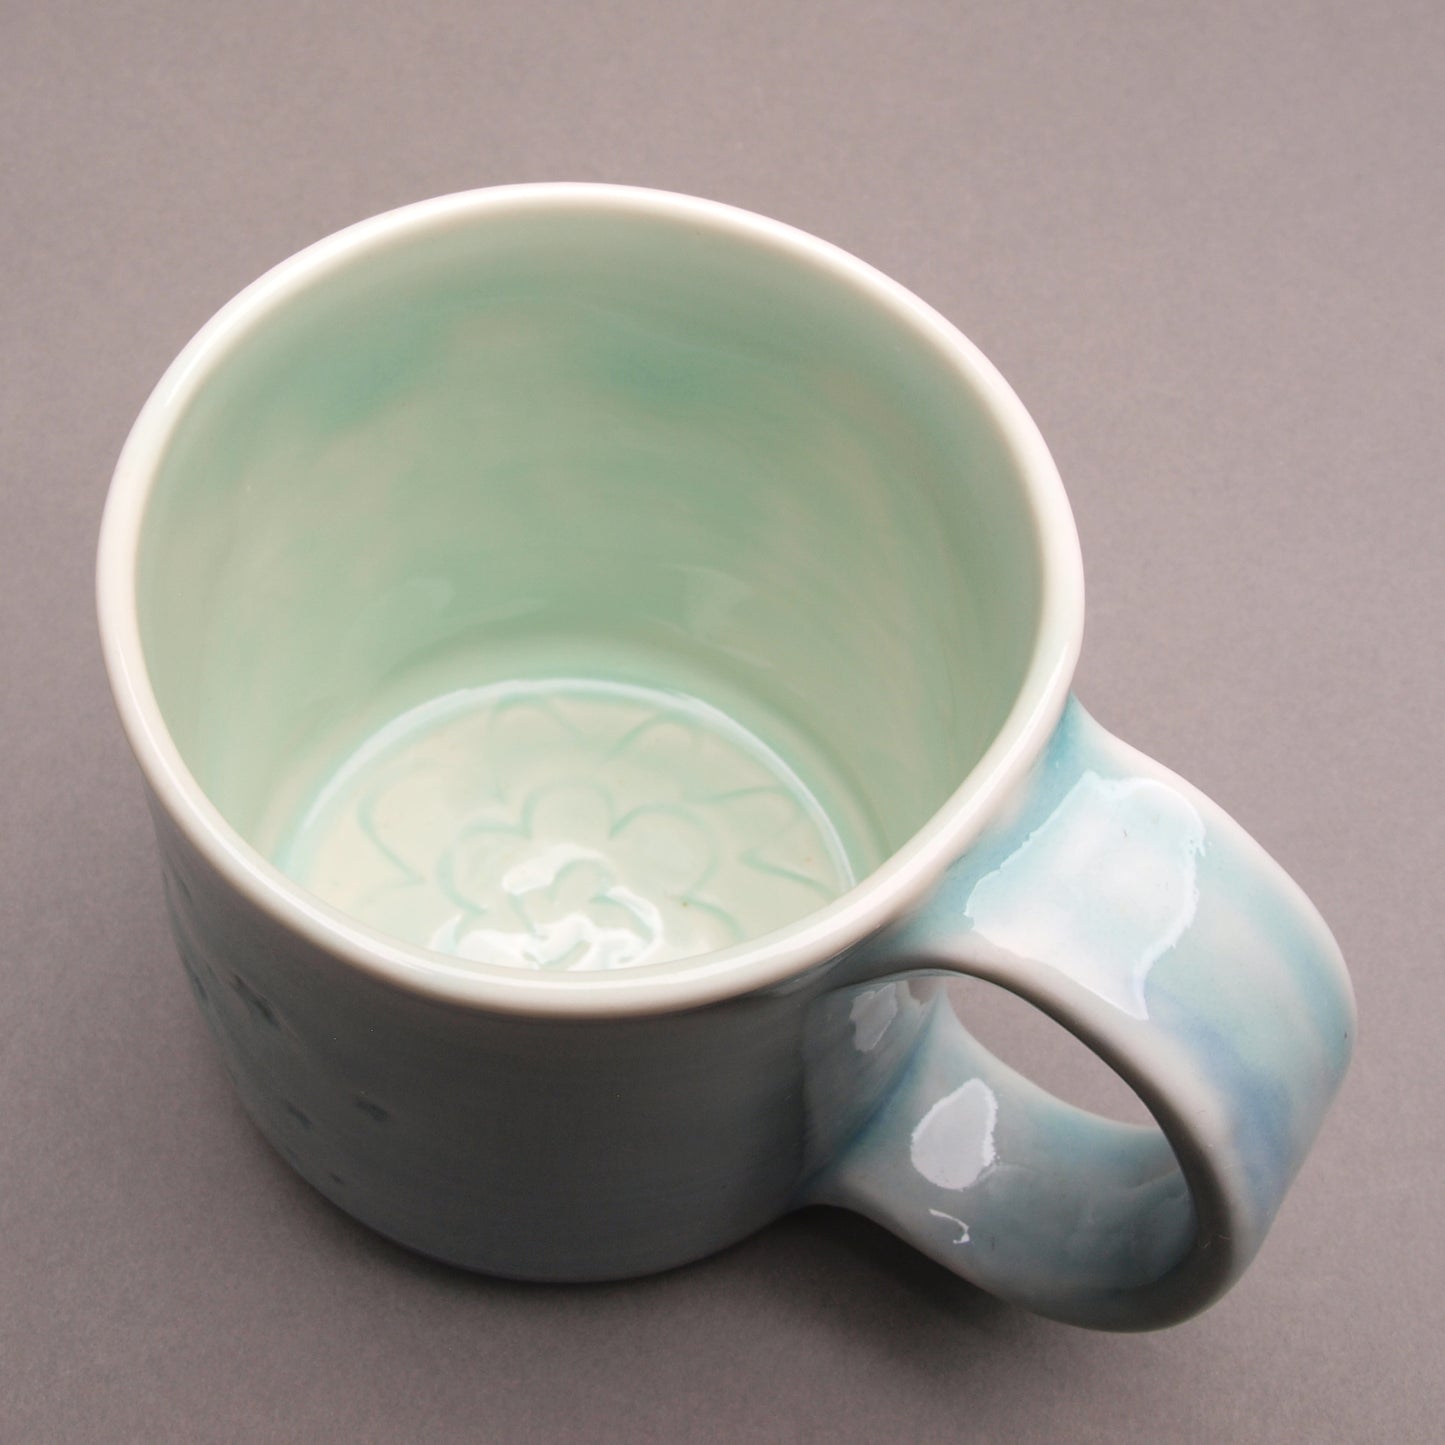 Handcrafted 'PARK CITY' Souvenir Mug with hummingbird by Mike Hays: Artistry, Comfort, and Durability